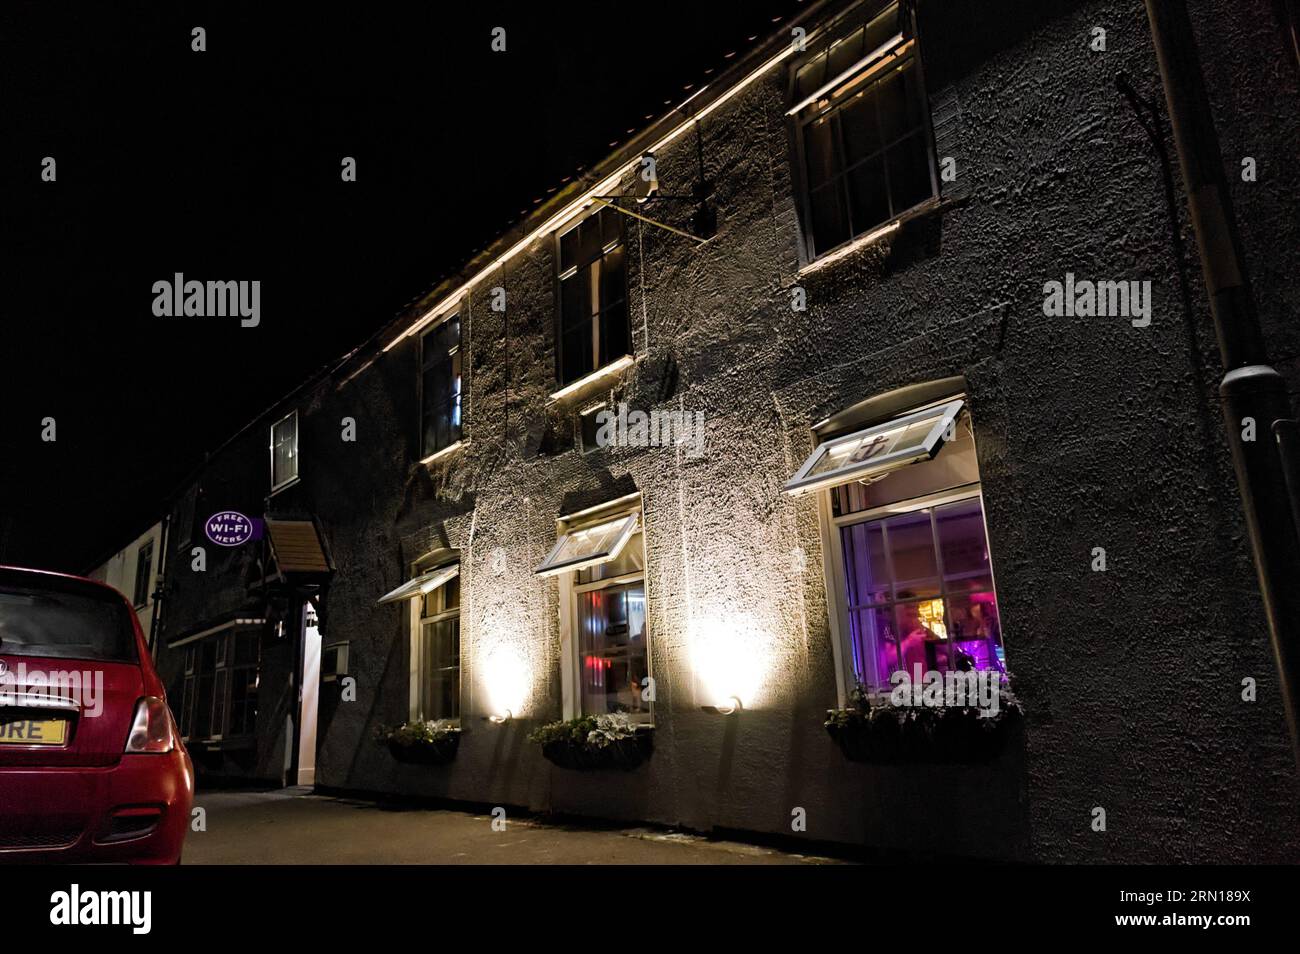 The Anchor Inn pub illuminated at night outside in the village Stock Photo